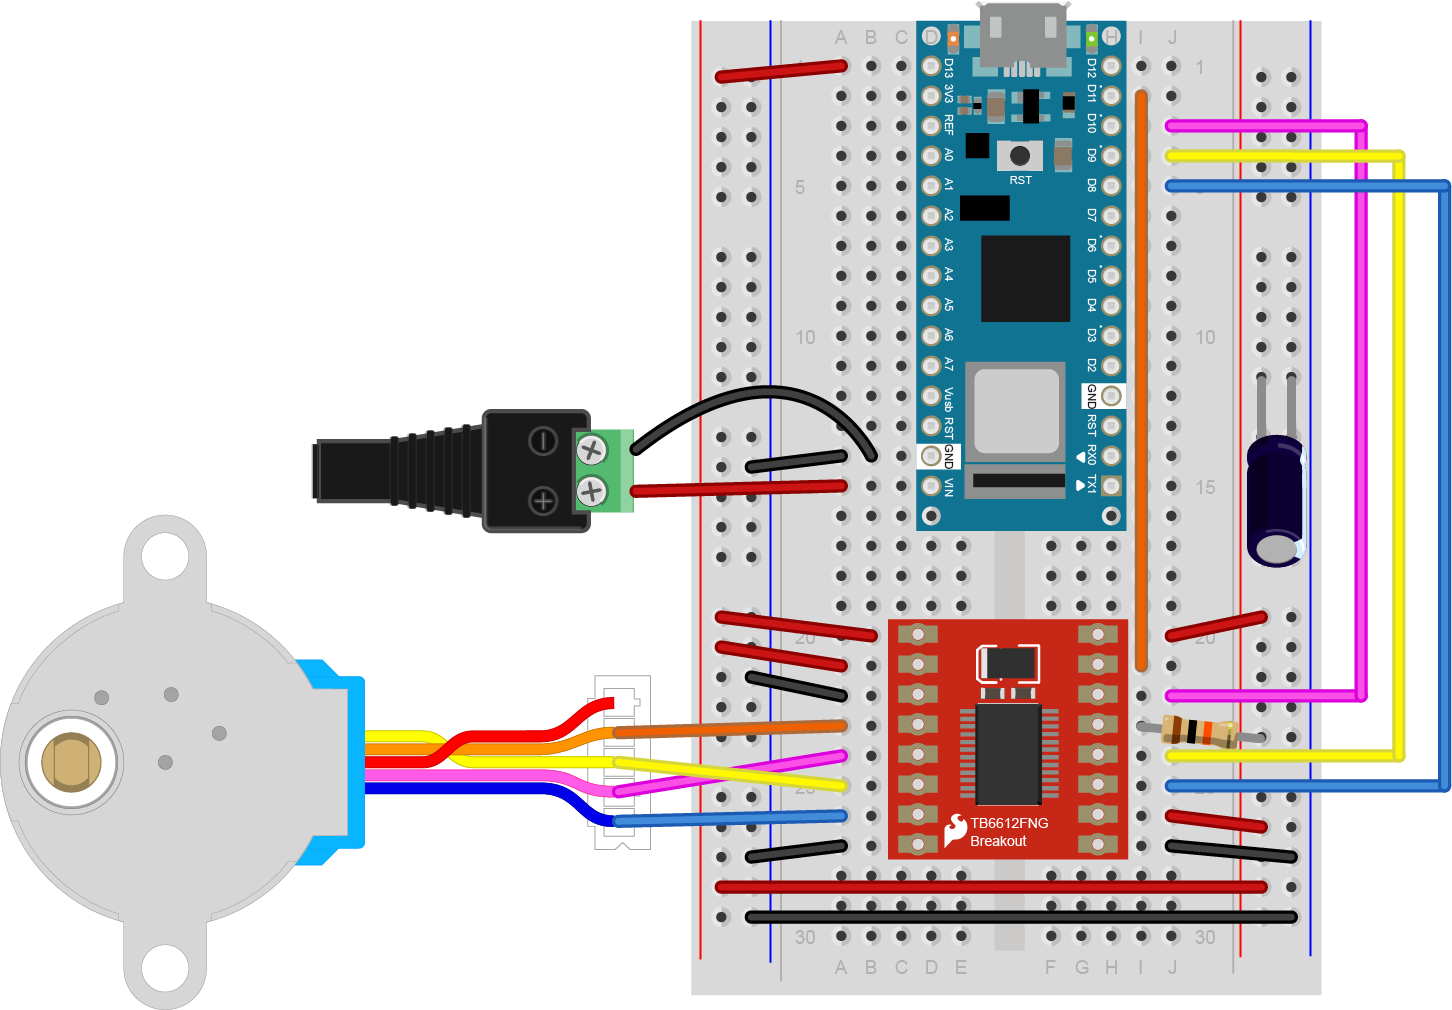 Figure 20. Breadboard view of an TB6612FNG running a 5V stepper motor from an Arduino Nano 33 IoT with an external voltage regulator. The circuit is similar to Figures 17 and 19 above, but in this image an external power jack is connected to the Nano's Vin pin (pin 15) and grounded to its ground pin (pin 14). A 7805 5V voltage regulator has been added to the breadboard in three rows just above the TB6612FNG on the left side of the breadboard. The regulator's input pin is closest to the top of the board, and is connected to the Nano's Vin pin and the positive terminal of the power jack. Its ground is in the middle, and is connected to the left side ground bus of the breadboard. Its output is closest to the bottom and is connected to the TB6612FNG's VMOT pin (pin 1). The whole circuit could be powered by a 9-12V DC power supply connected to the power jack. The regulator would ensure that the motor and the STSPI220 always get 5V and up to 1A.